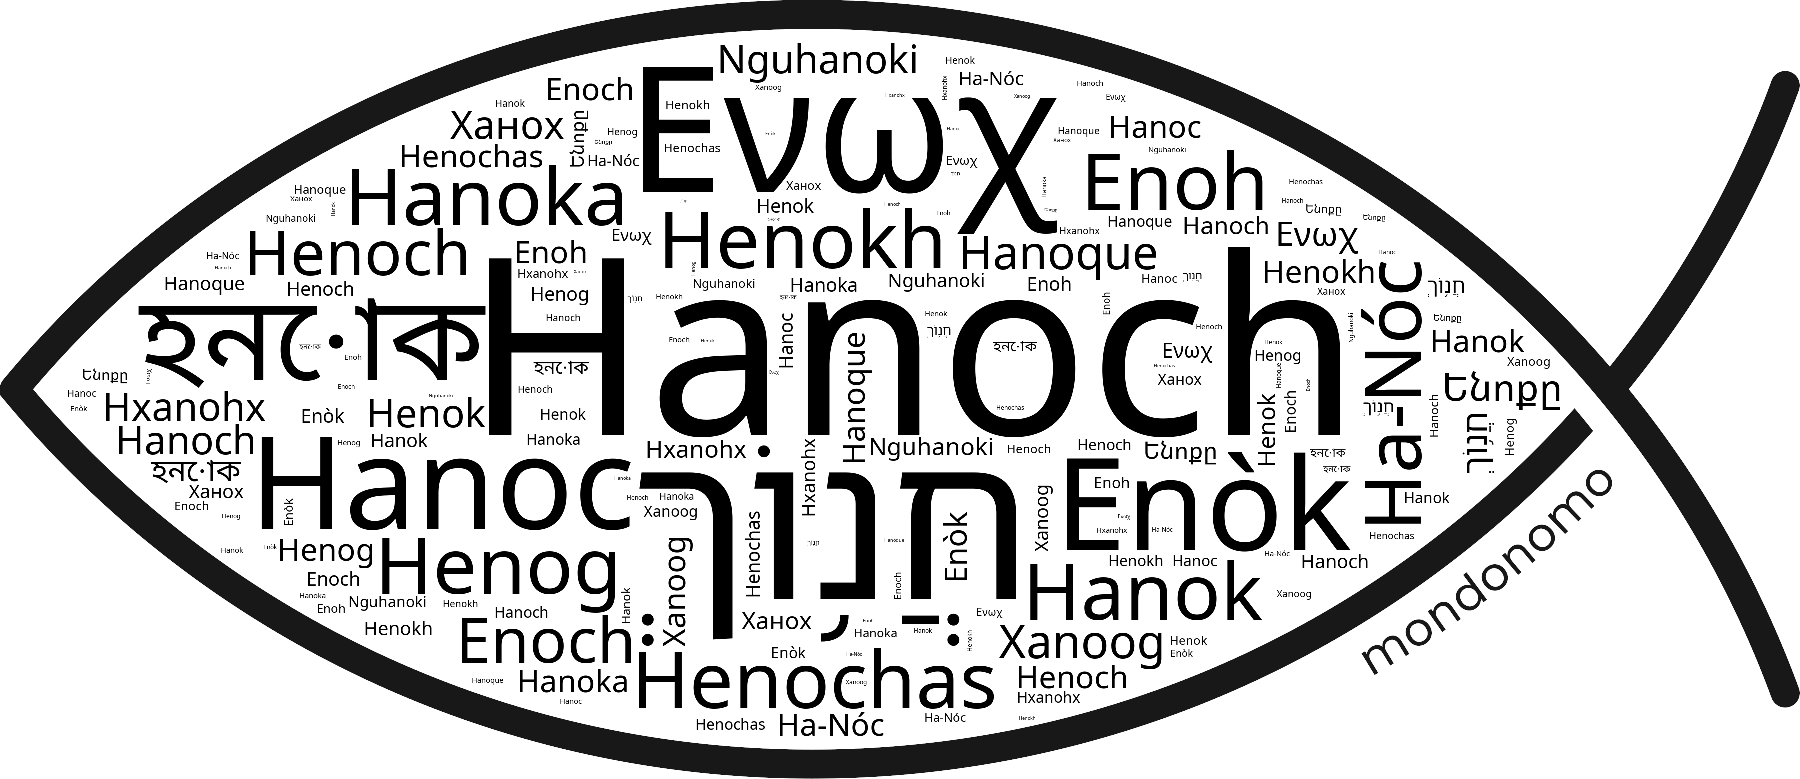 Name Hanoch in the world's Bibles